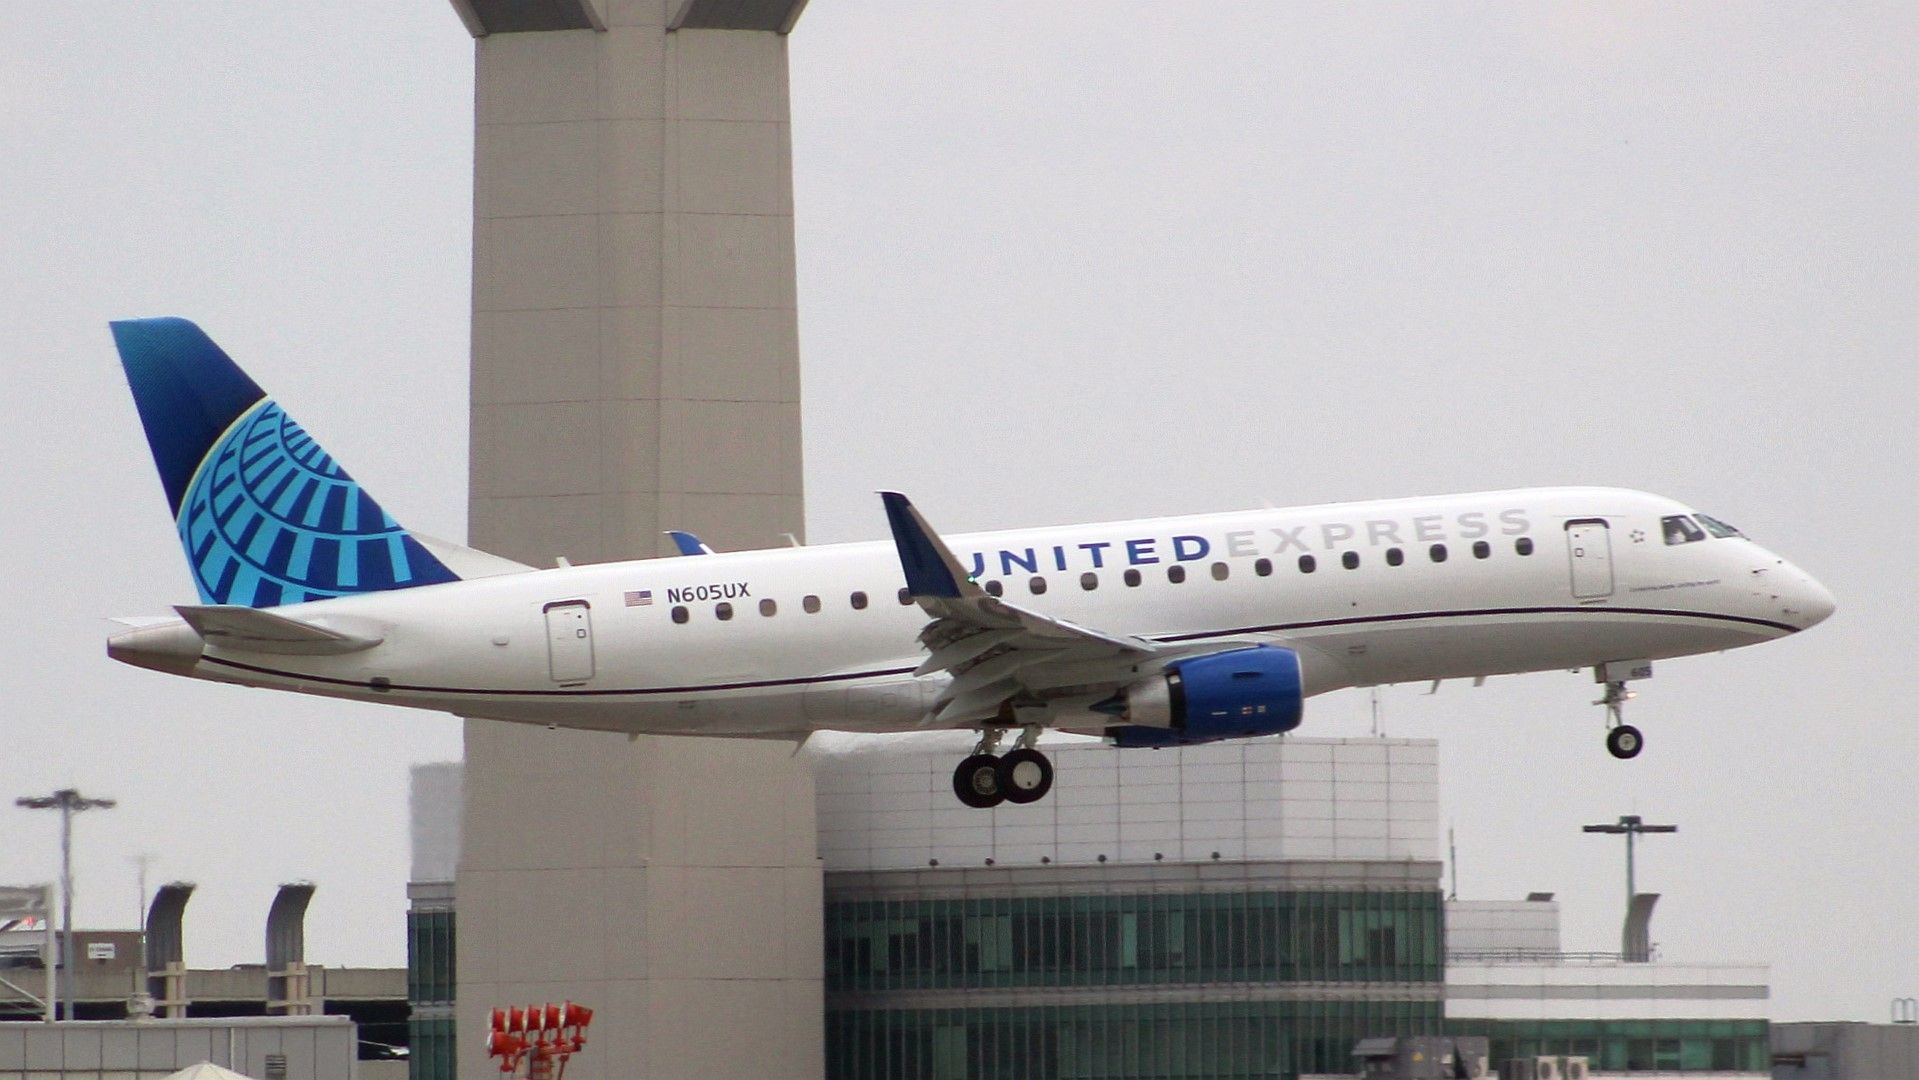 United Airlines ERJ-175 Flying Past An Air Control Tower